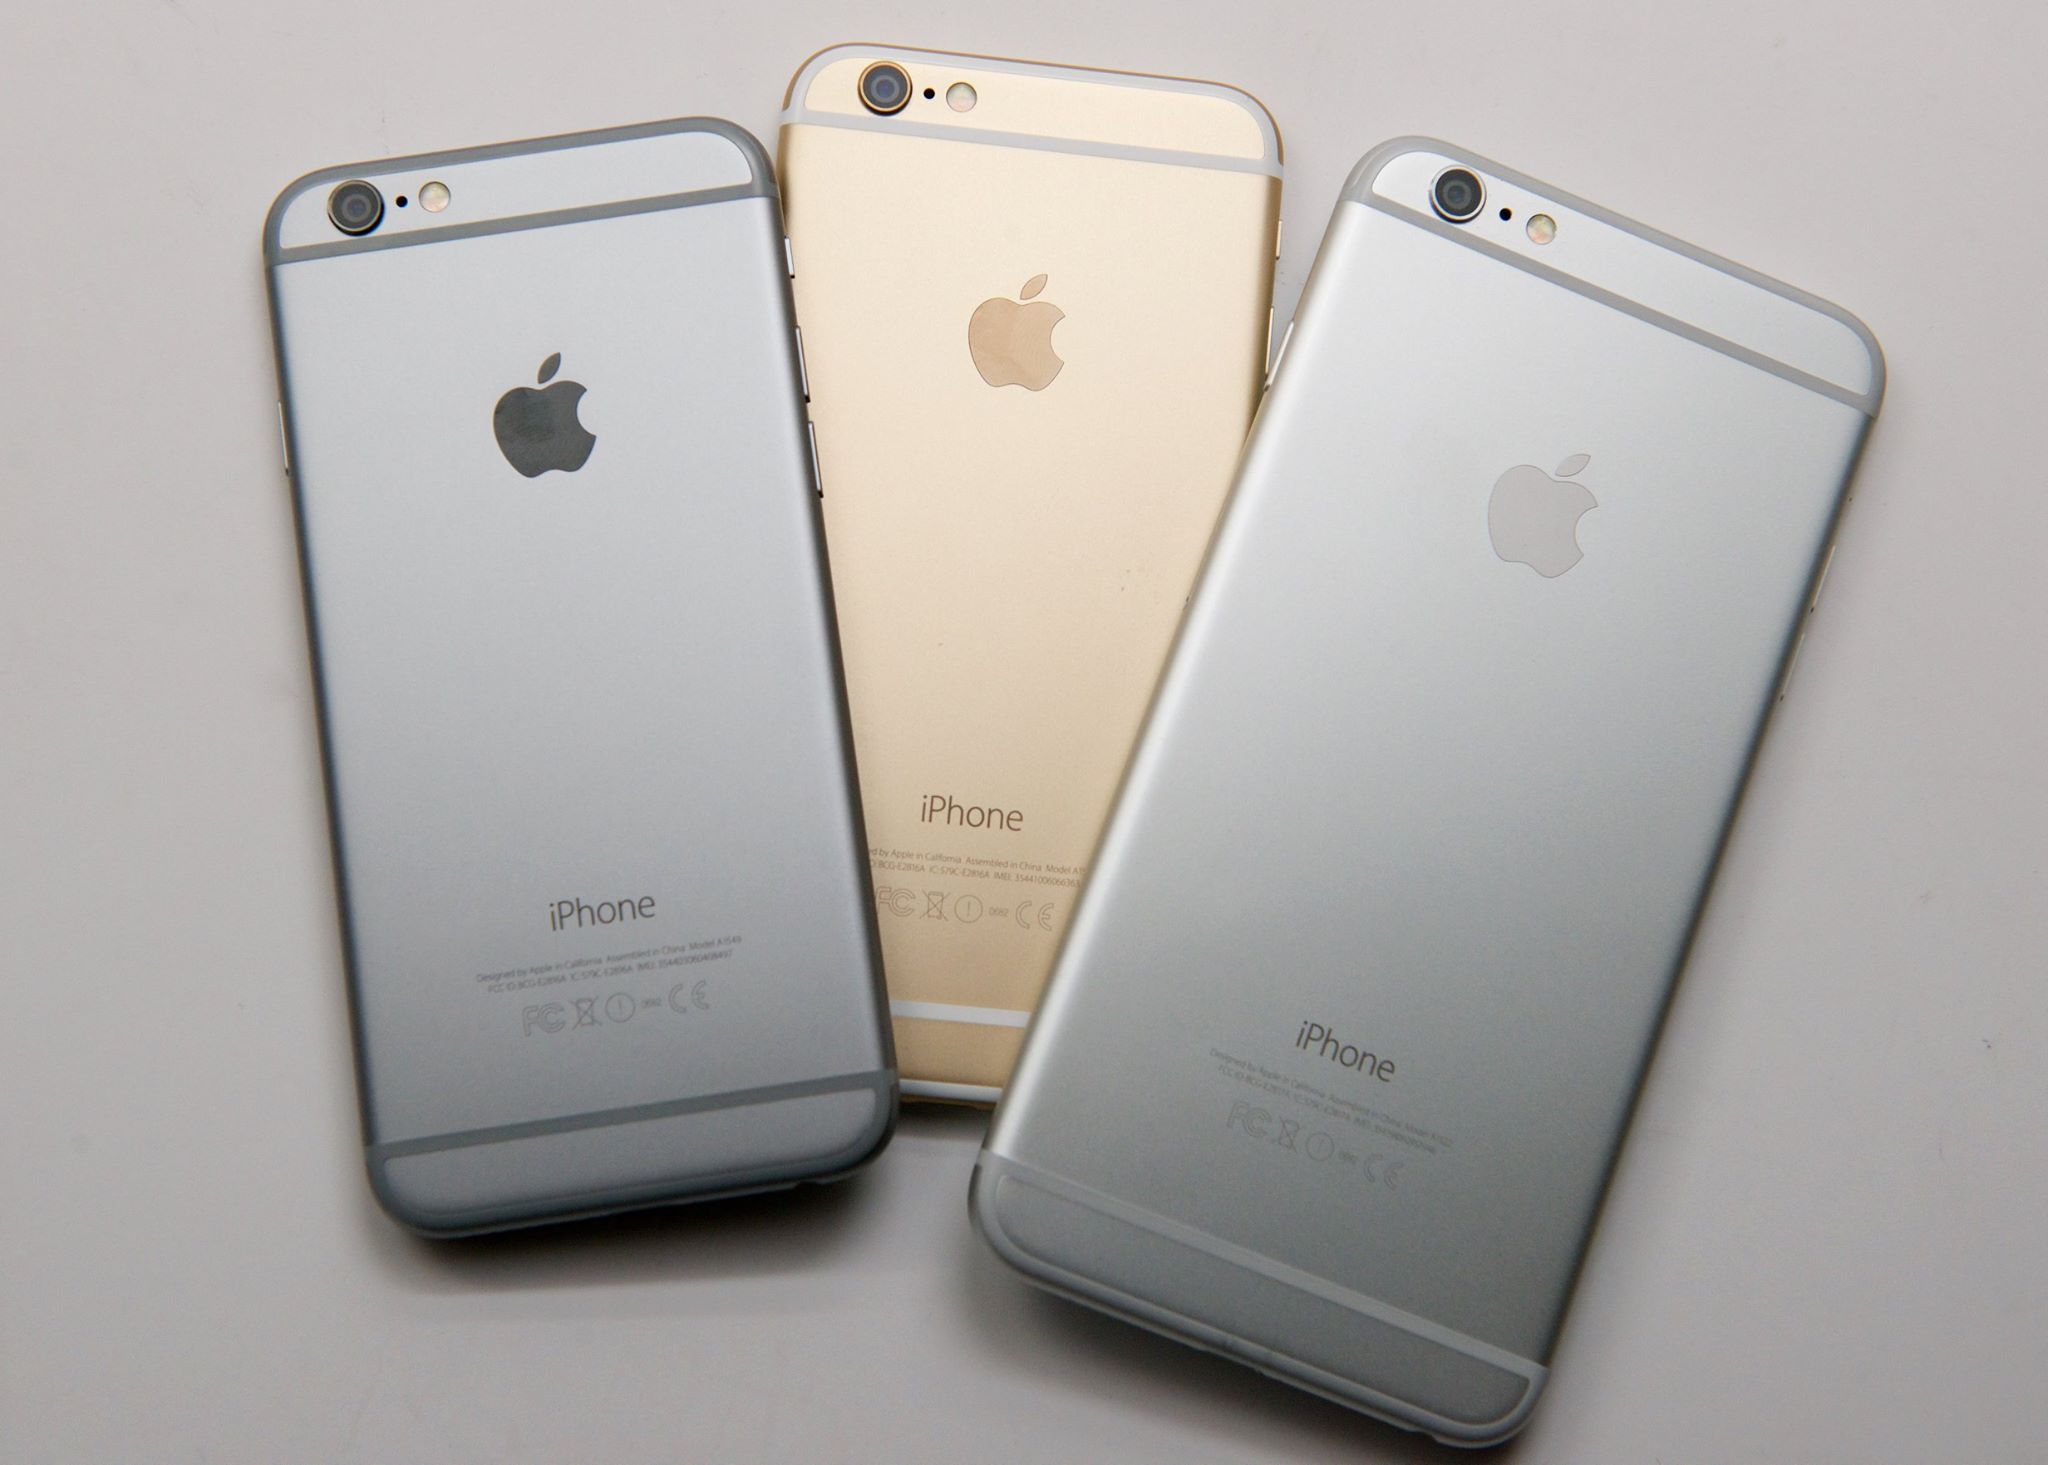 Where to find the best iPhone 6 Plus and iPhone 6 deals for April 2015.